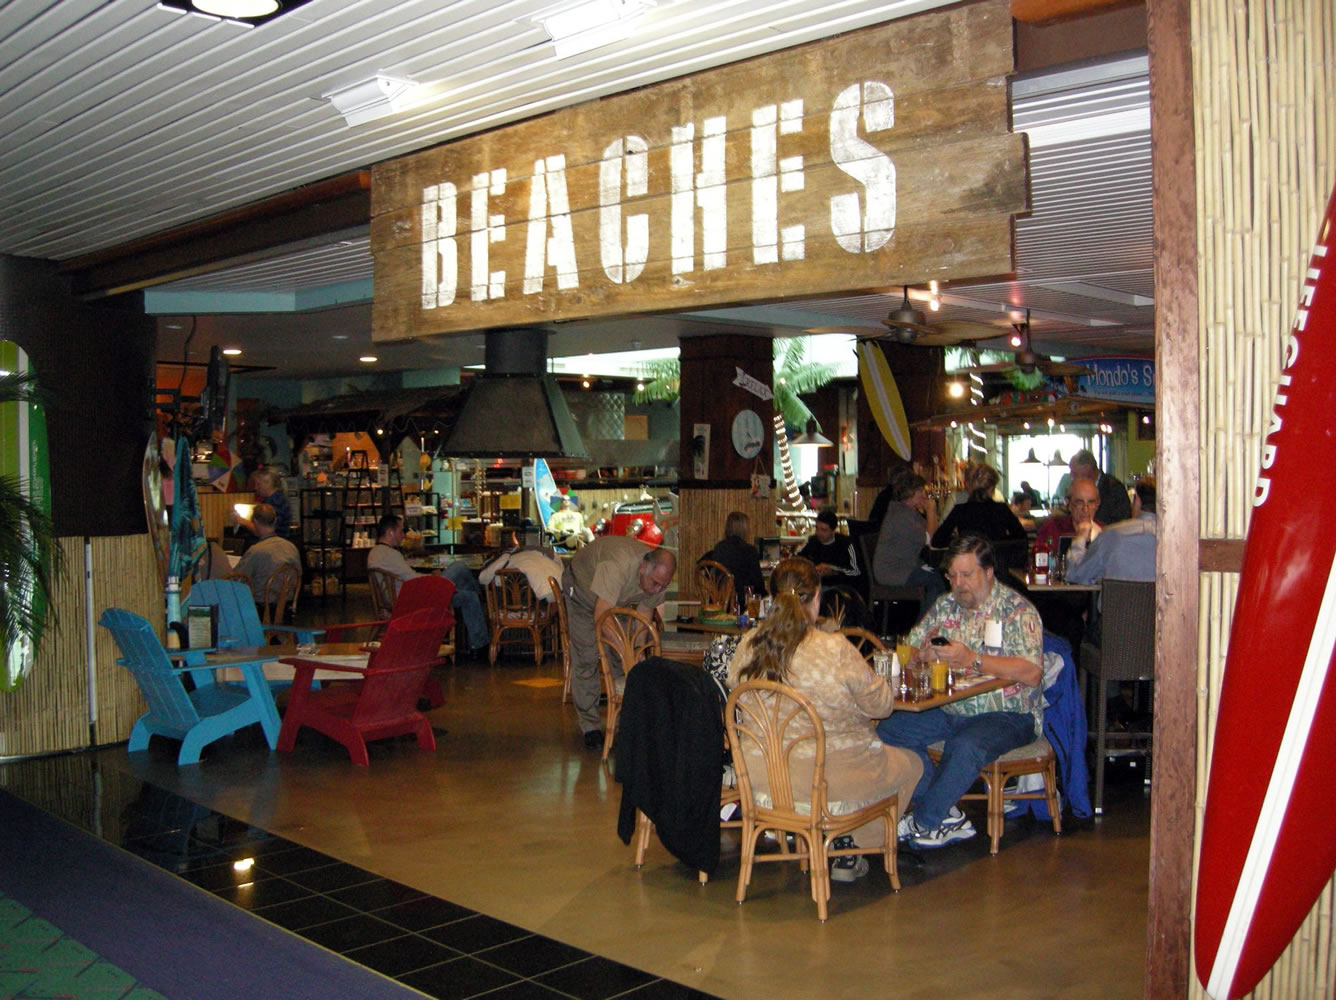 Two Vancouver-based service businesses, the Beaches Restaurant and The Barbers, are operating at Portland International Airport and learning the ebbs and flows of 24-hour travel schedules.